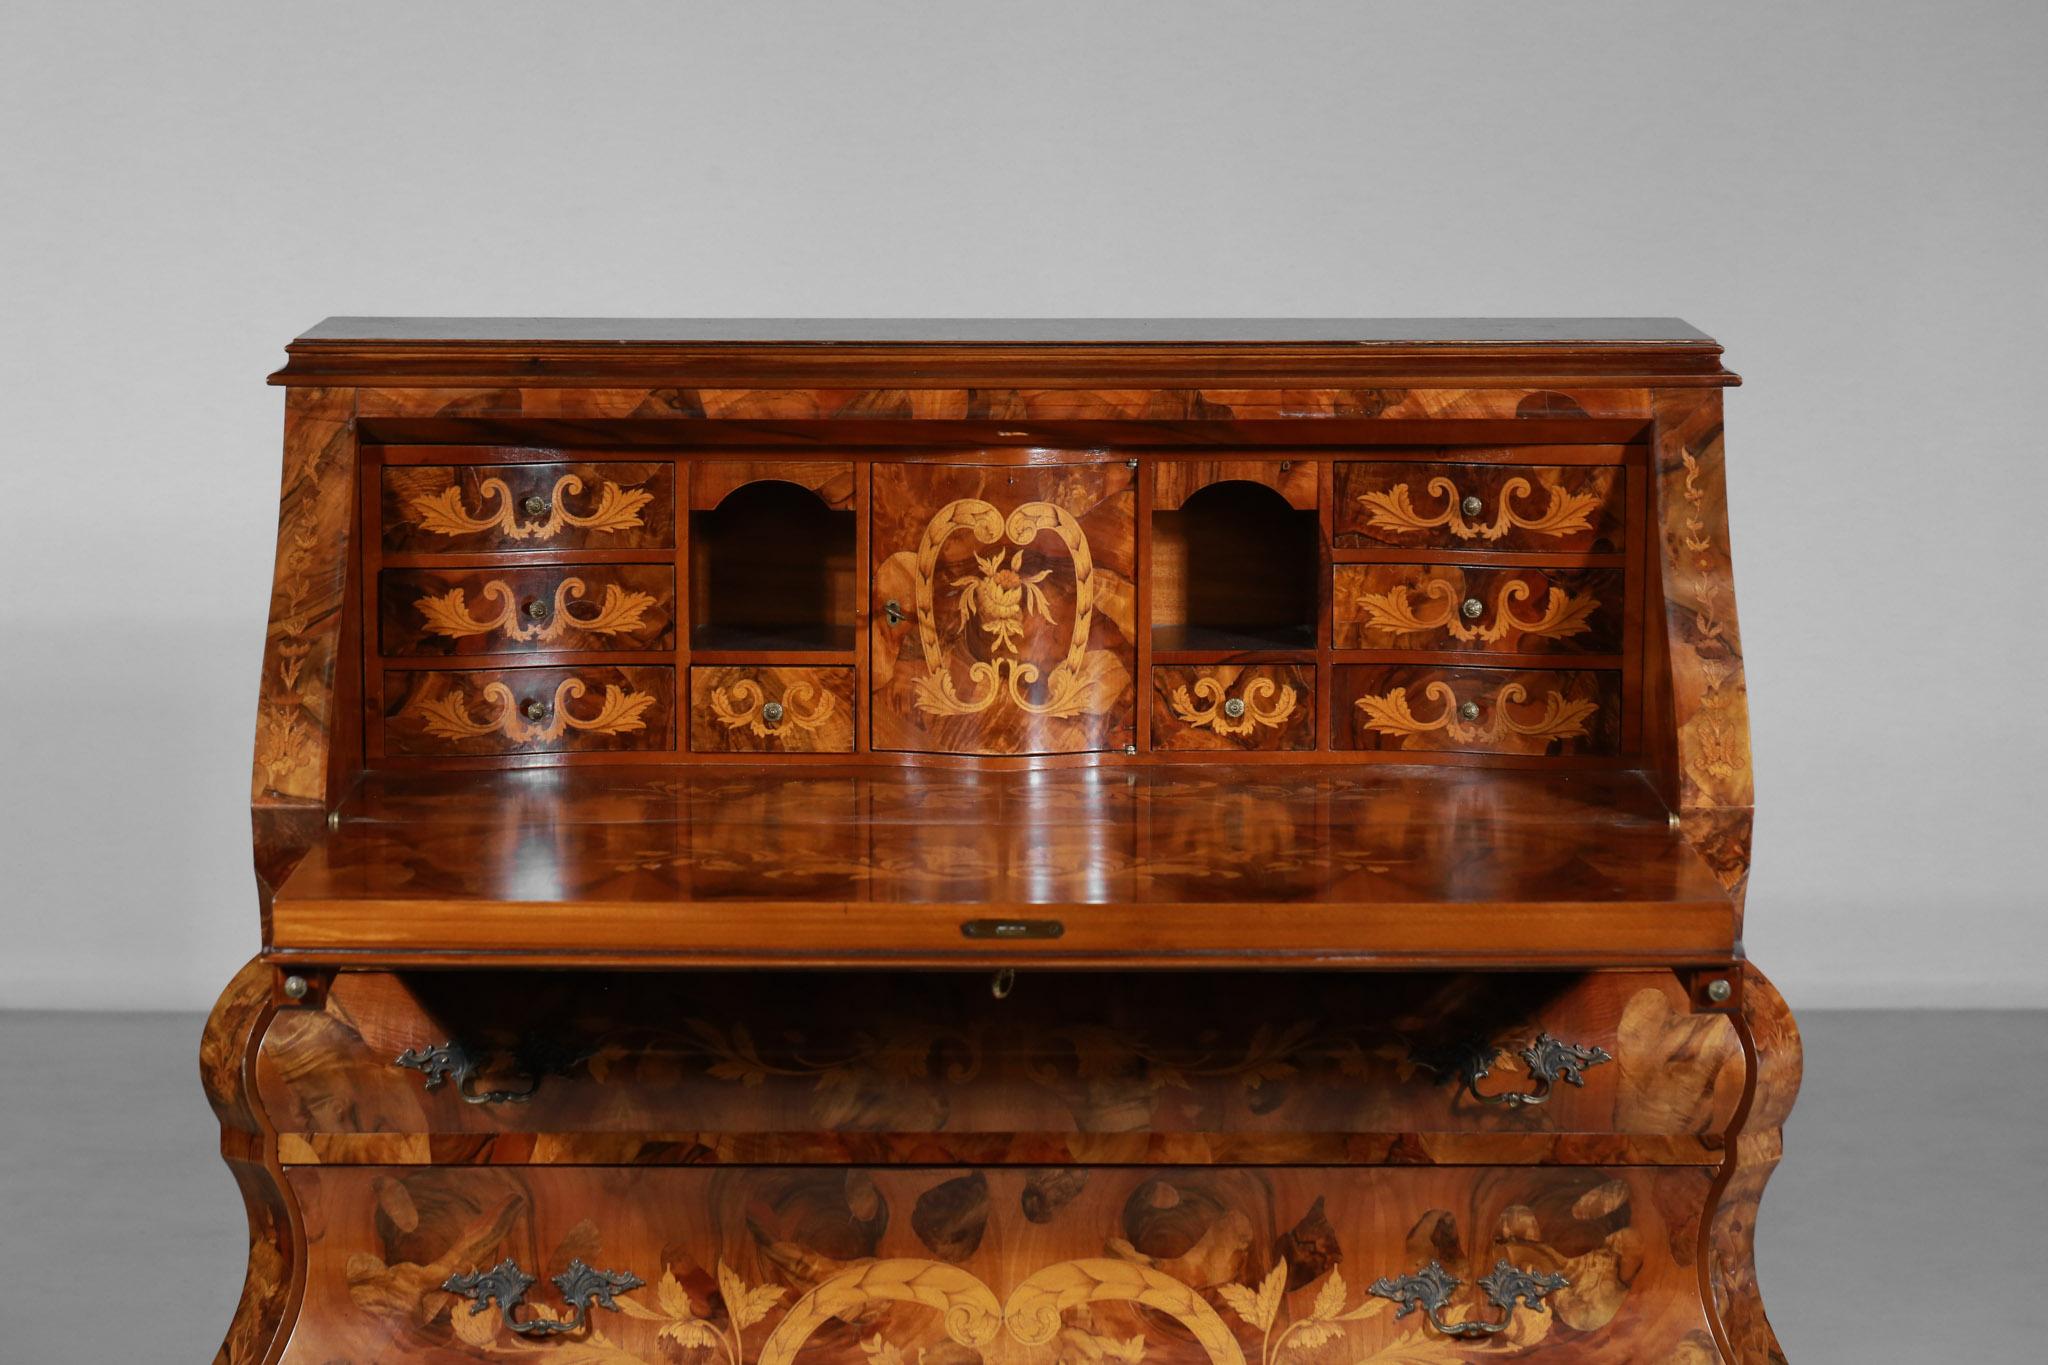 Chest of drawers in Dutch style from the beginning of the century.
Entirely inlaid with floral decoration, with brass handles and a lion paw shaped base.
The upper part consists of a secretary with several storage compartments and the lower part